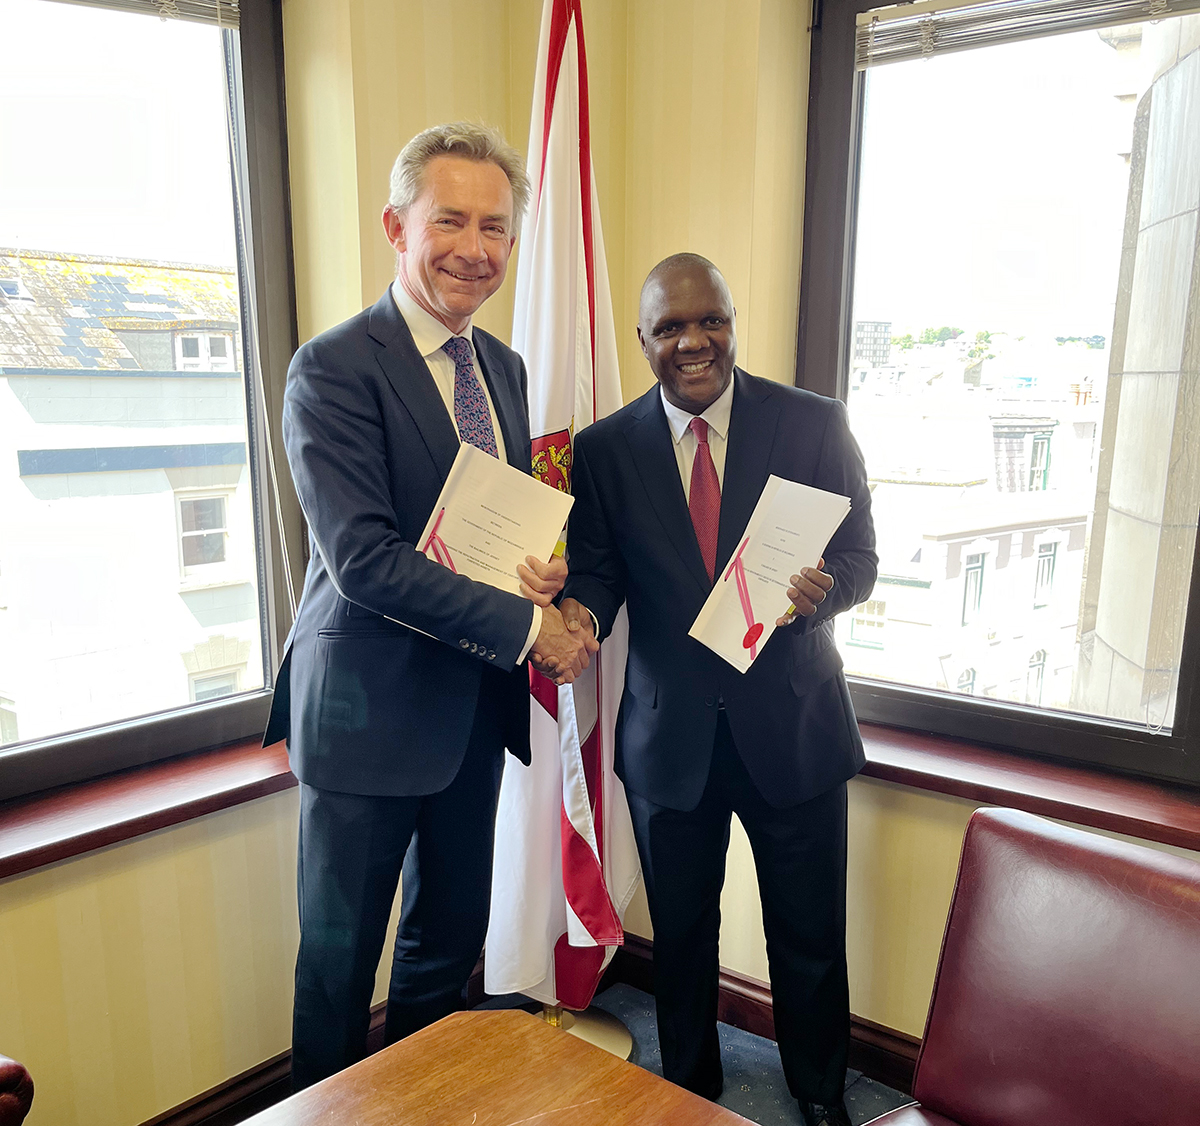 👏 Brilliant news from our partners in #Jersey and #Mozambique: GBP 829,500 in proceeds of corruption will be returned to Mozambique and used to support the country's key enforcement agencies. That's over MZN 66 million or USD 1 million. 🇯🇪 HM Attorney General Mark Temple KC and